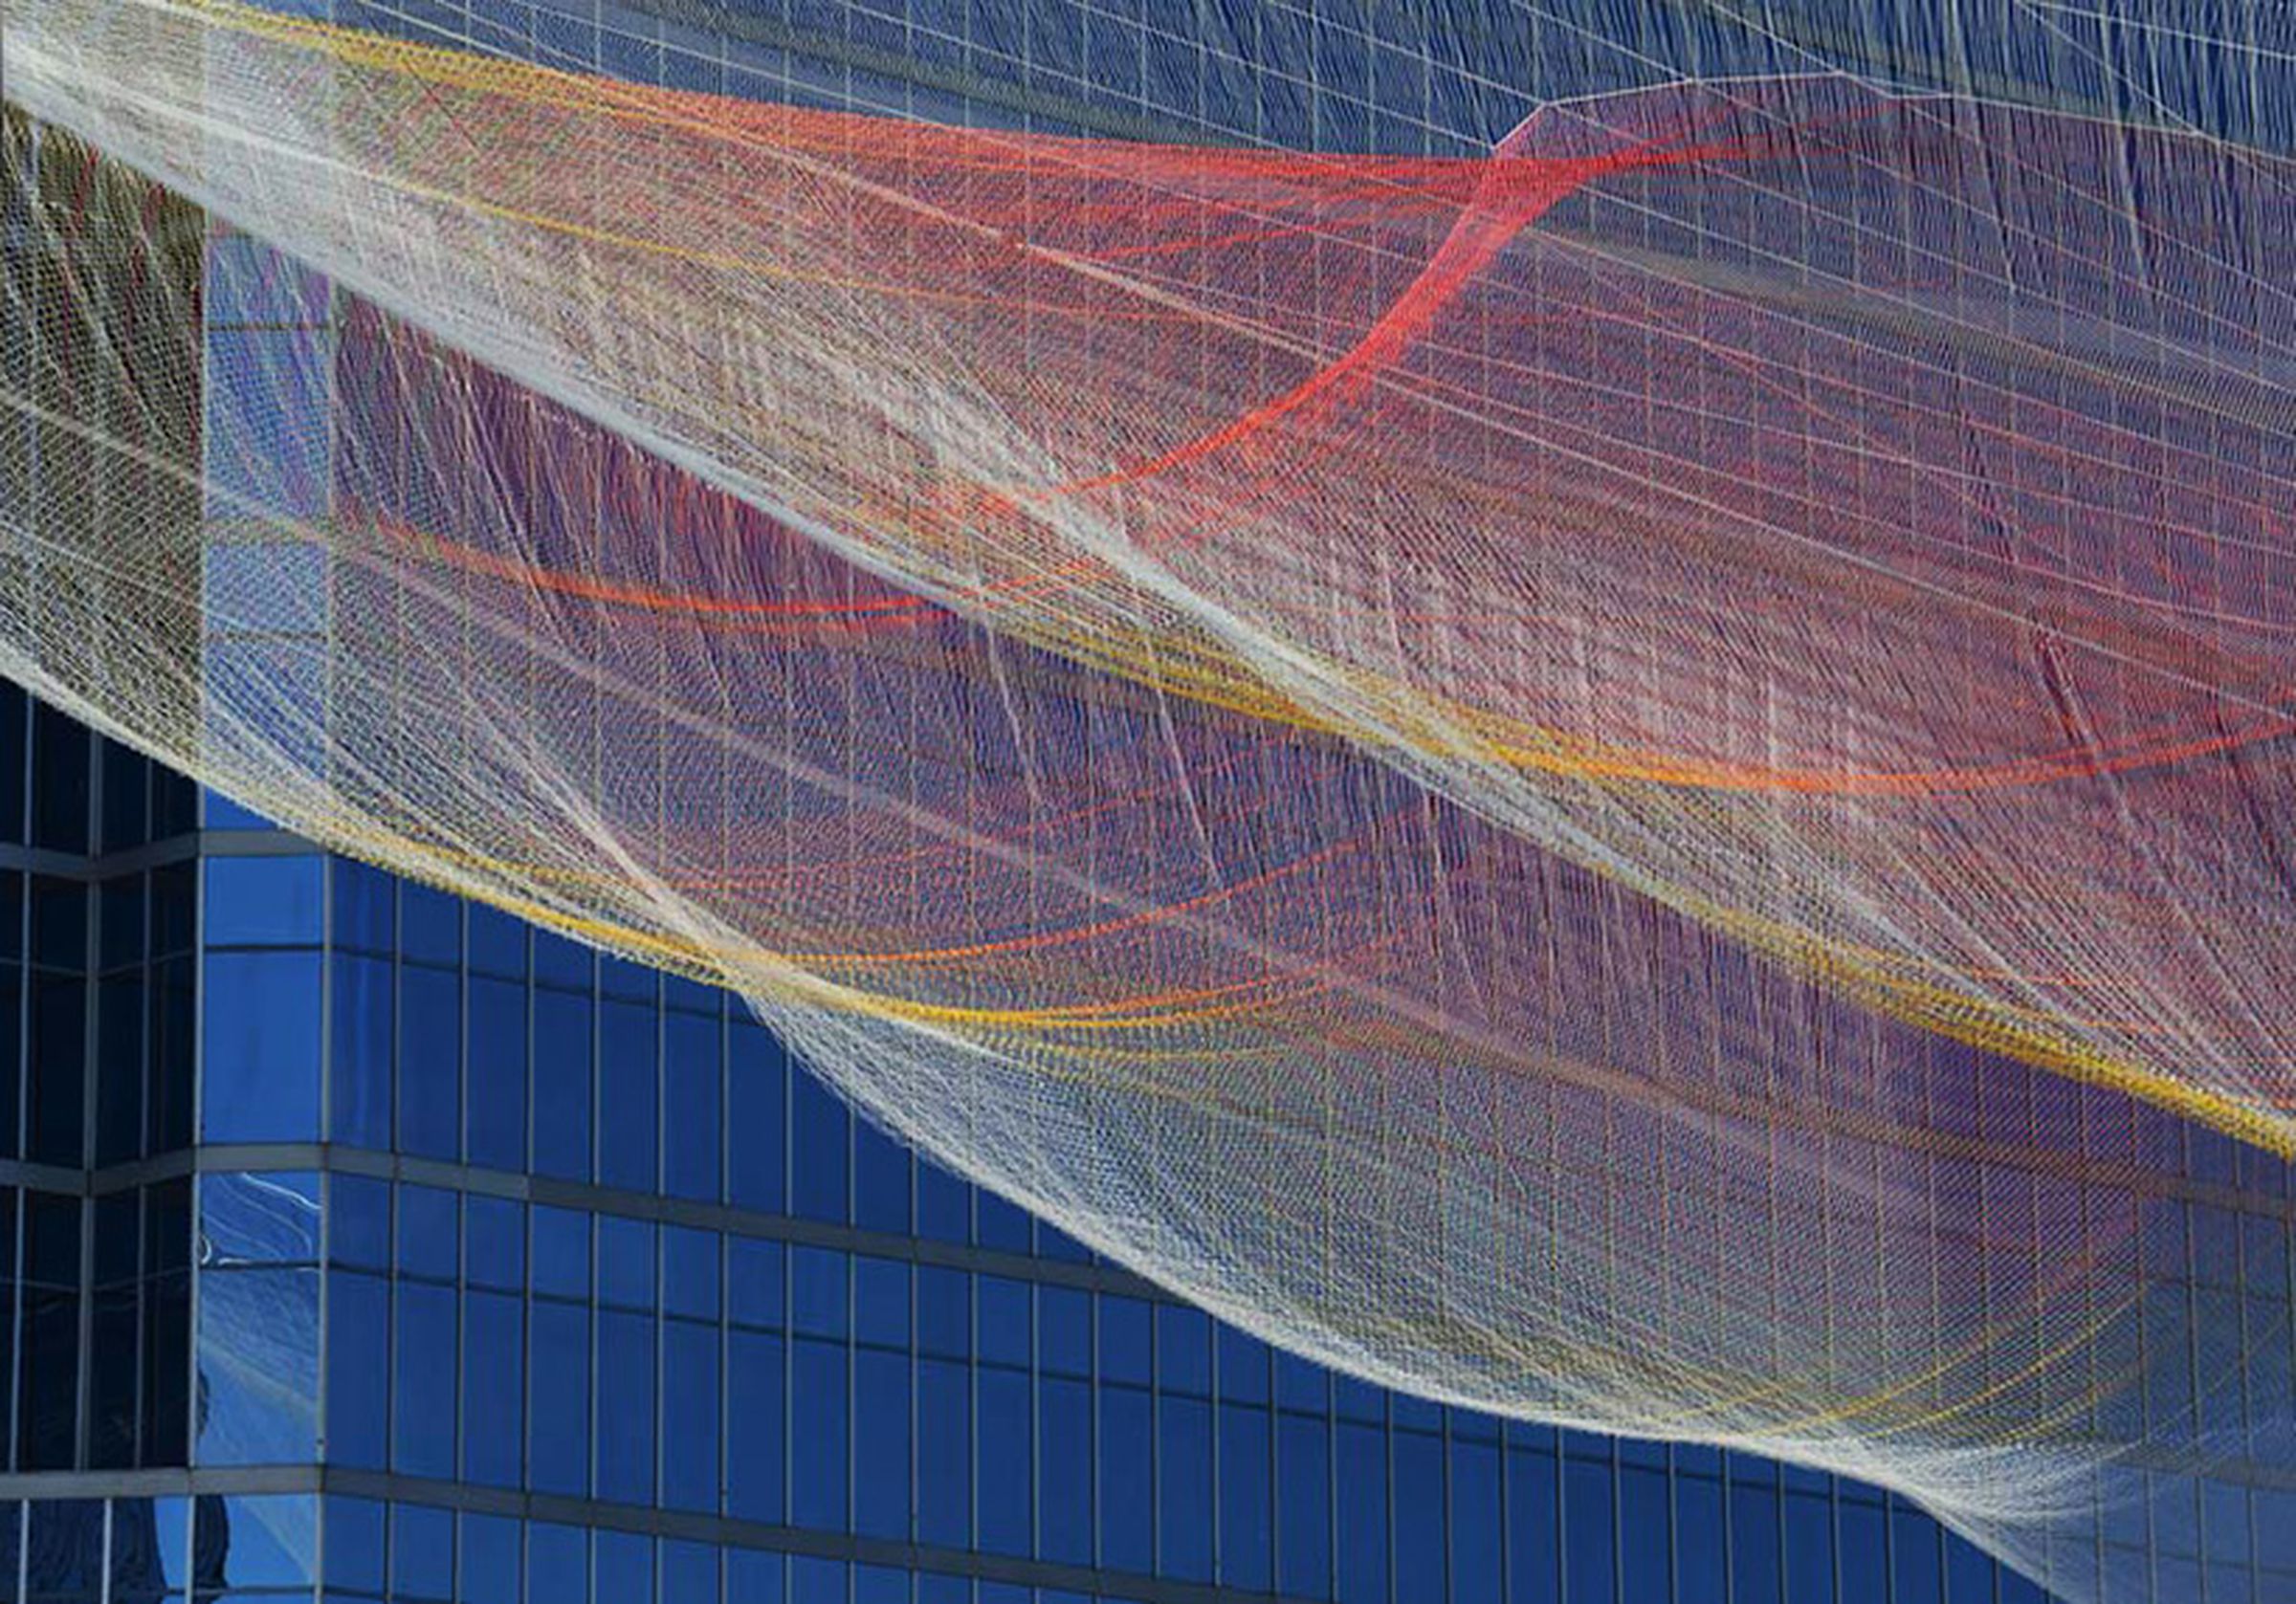 'Unnumbered Sparks' by Janet Echelman and Aaron Koblin